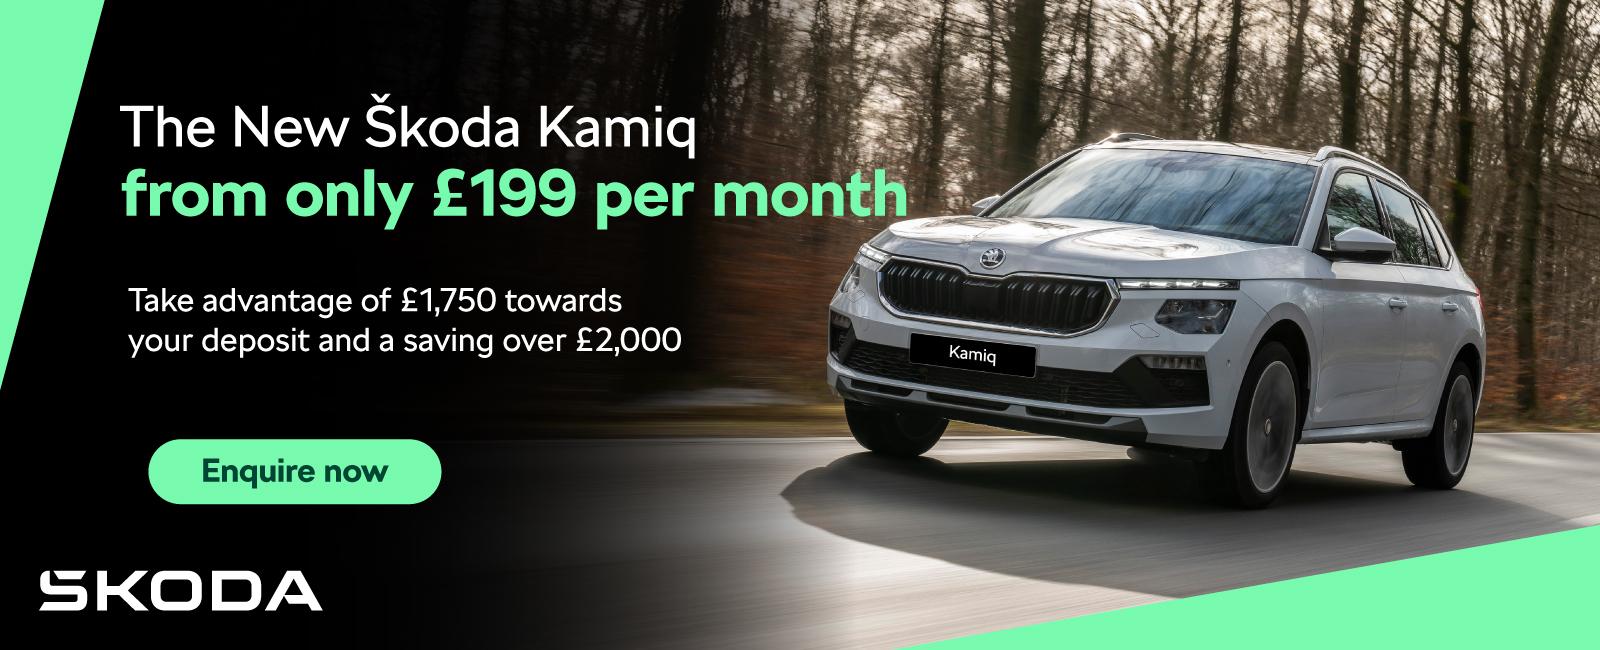 The Skoda Kamiq from only £199 per month